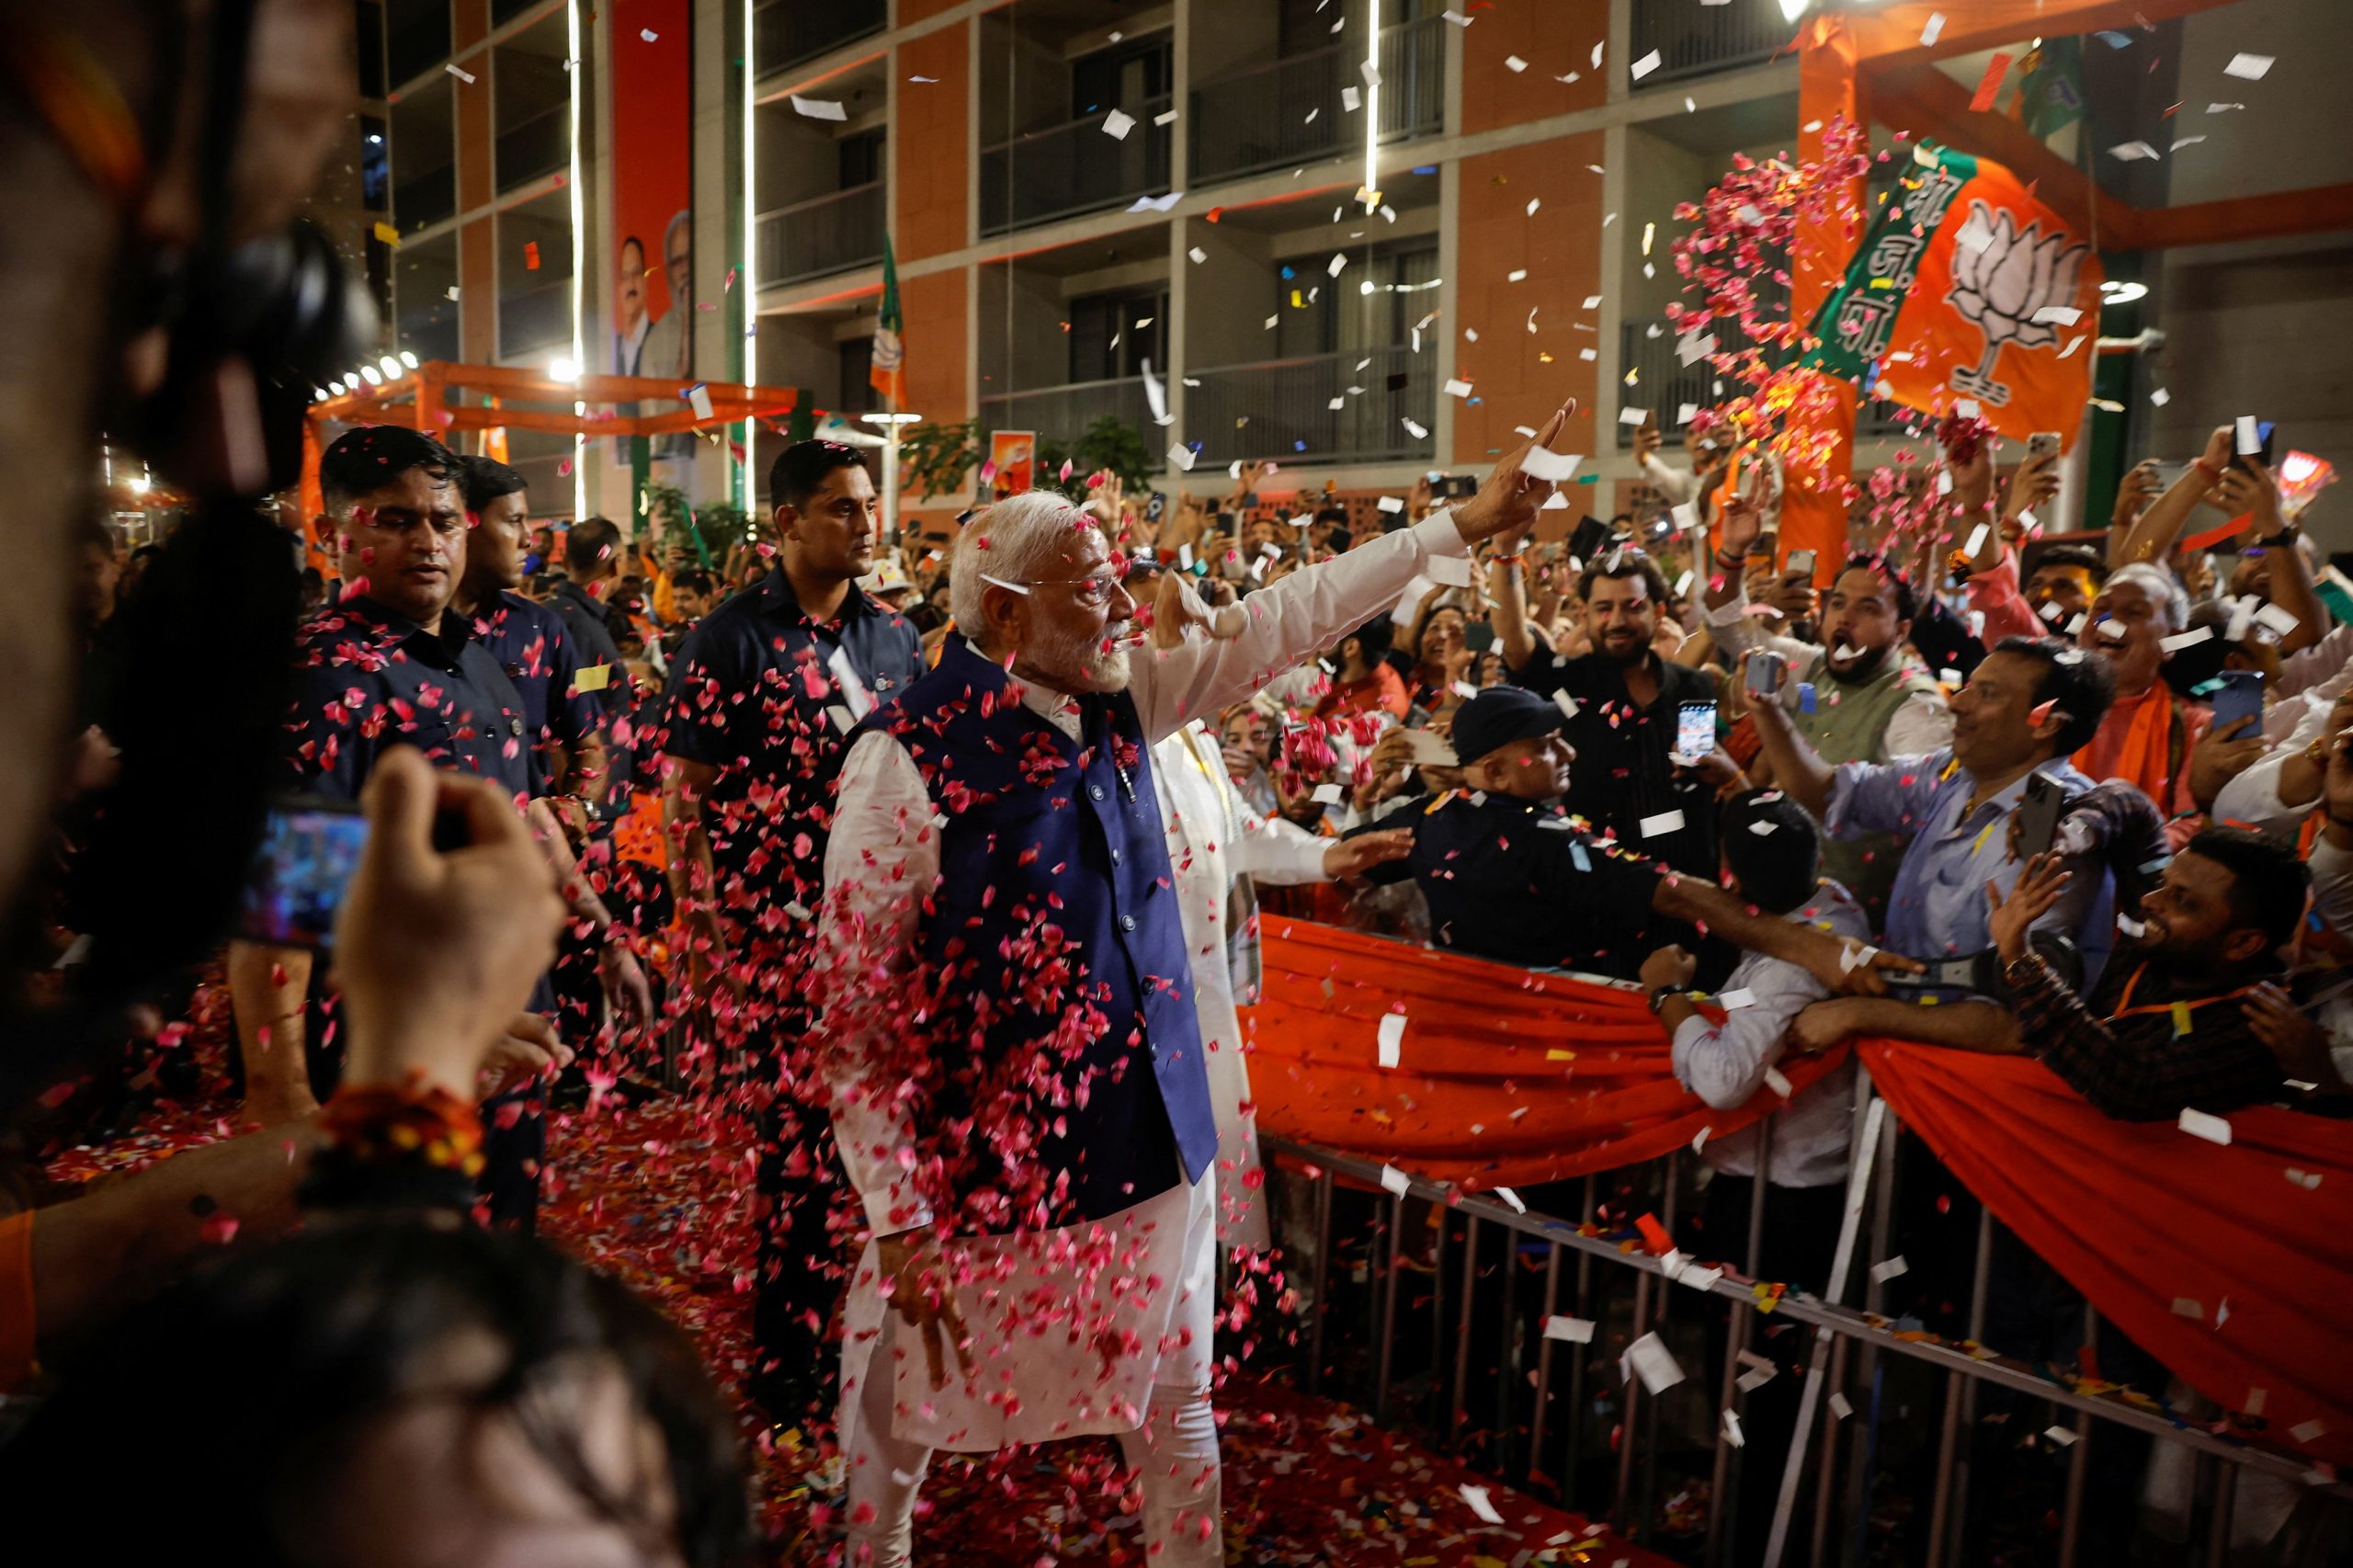 Modi Loses Majority in Stunning Election Setback, but Is Set to Keep Power in India